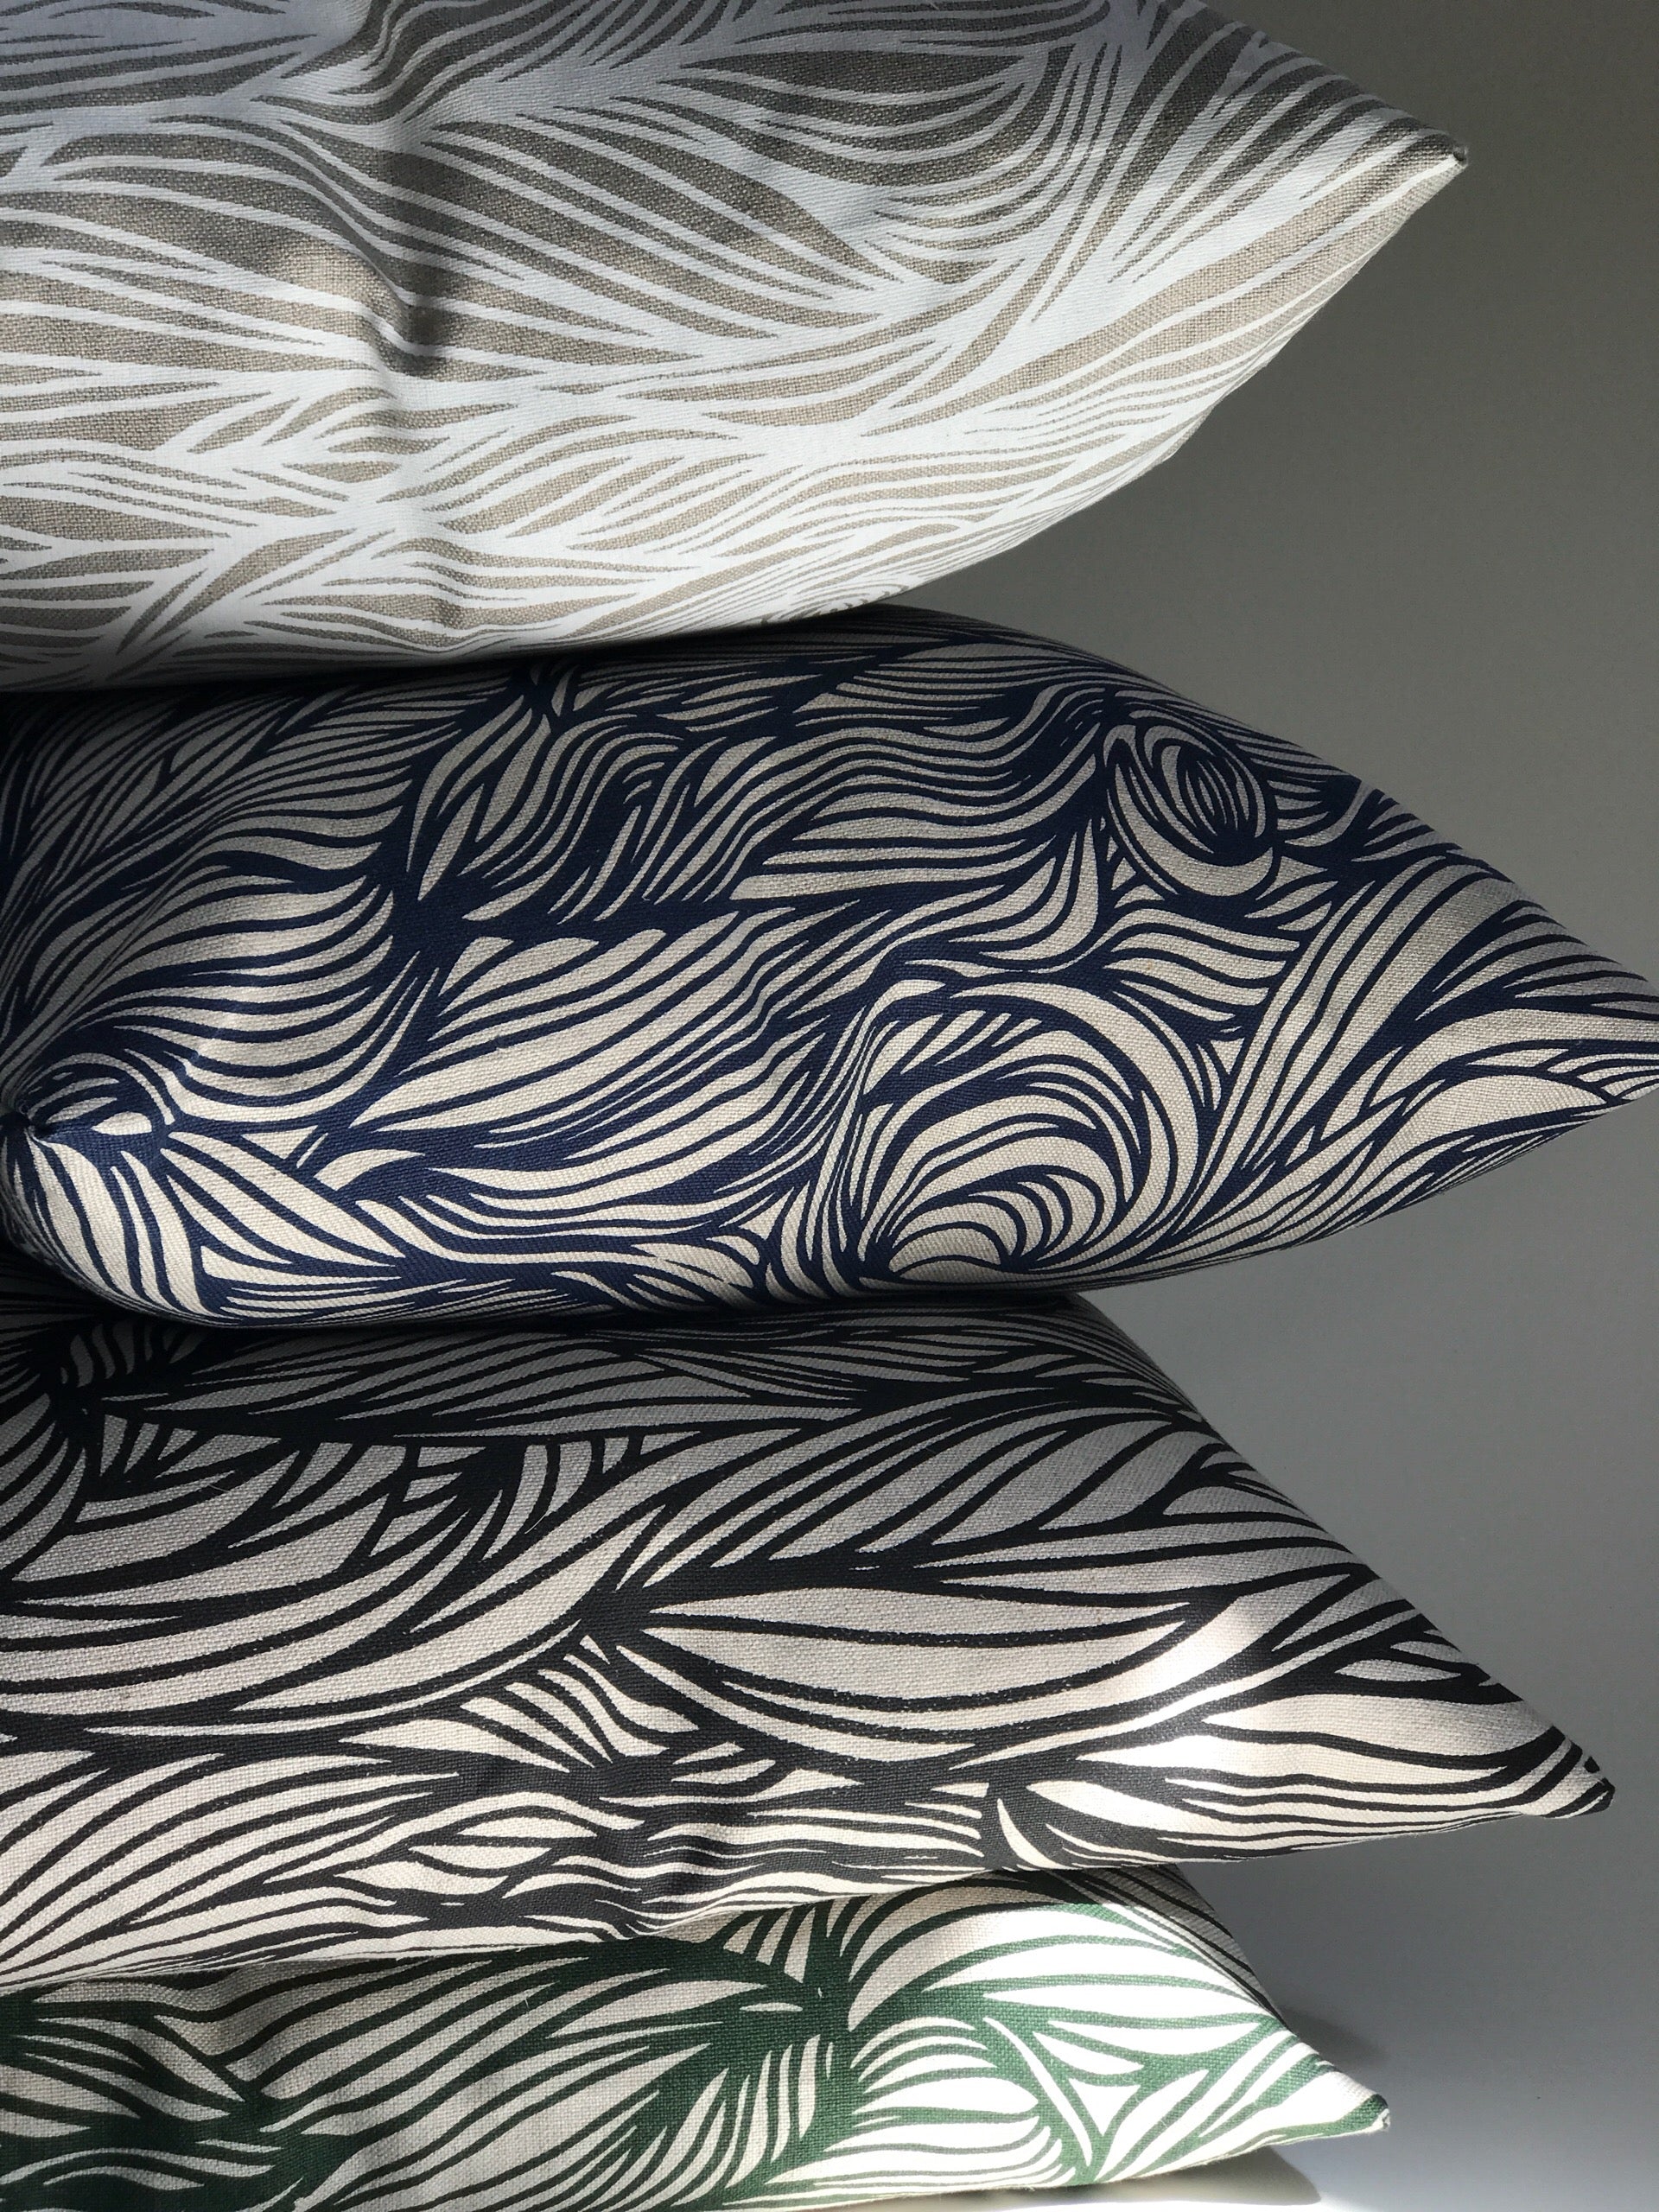 greige textiles made to order pillows.  made in the USA with handprinted linen